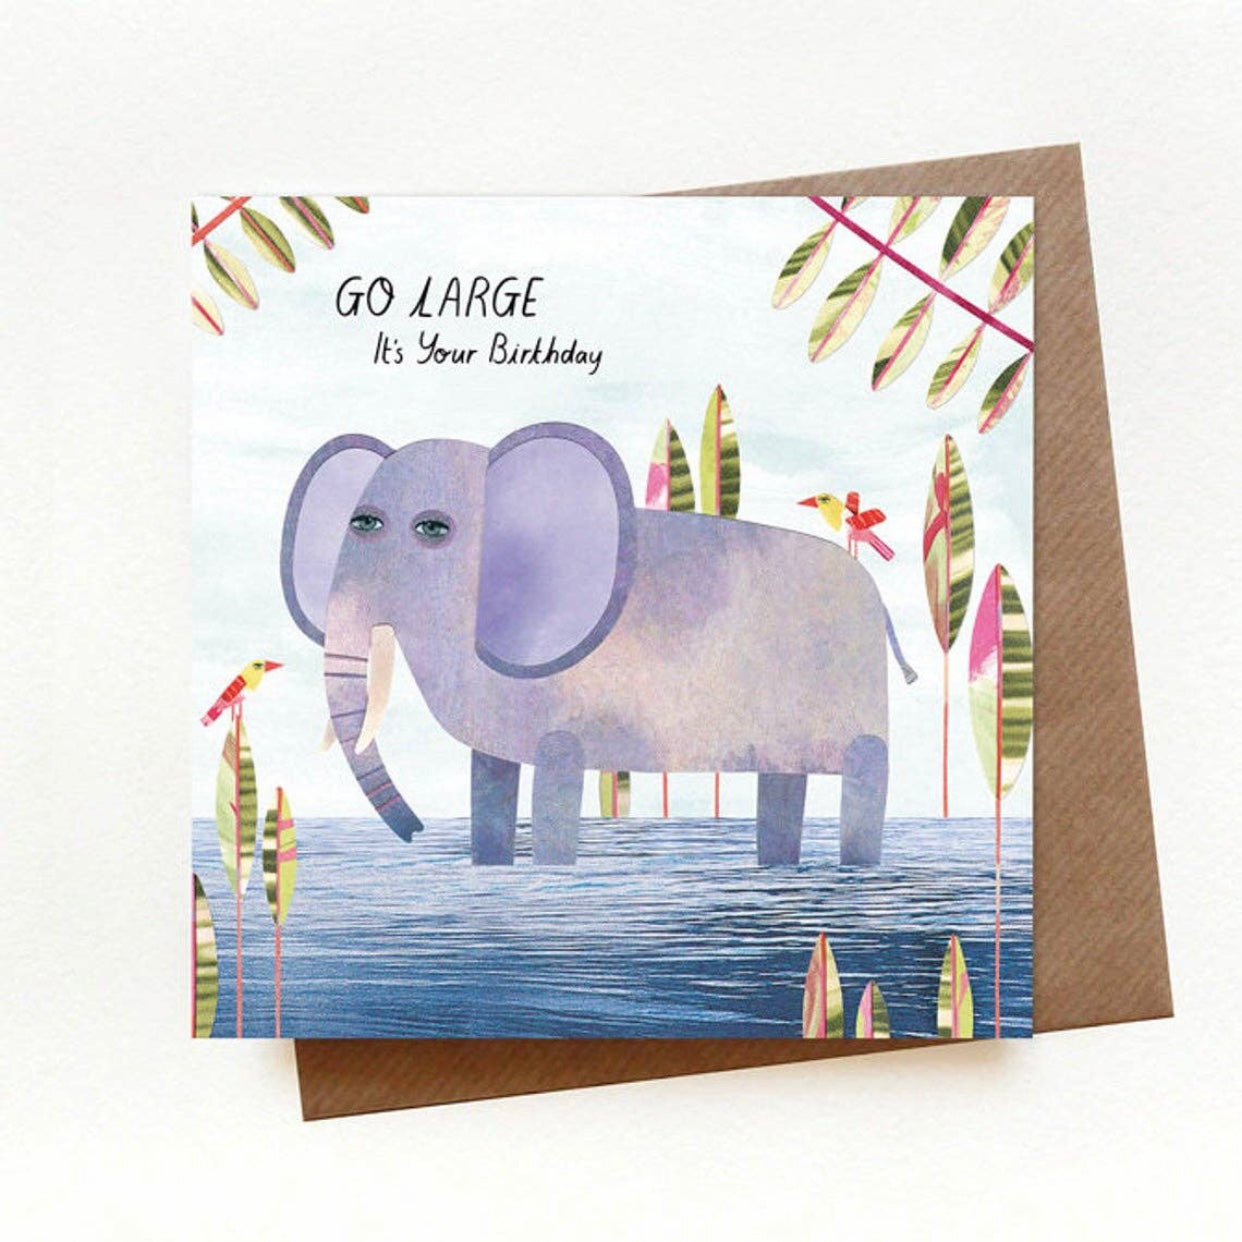 Go Large it's your birthday greeting card